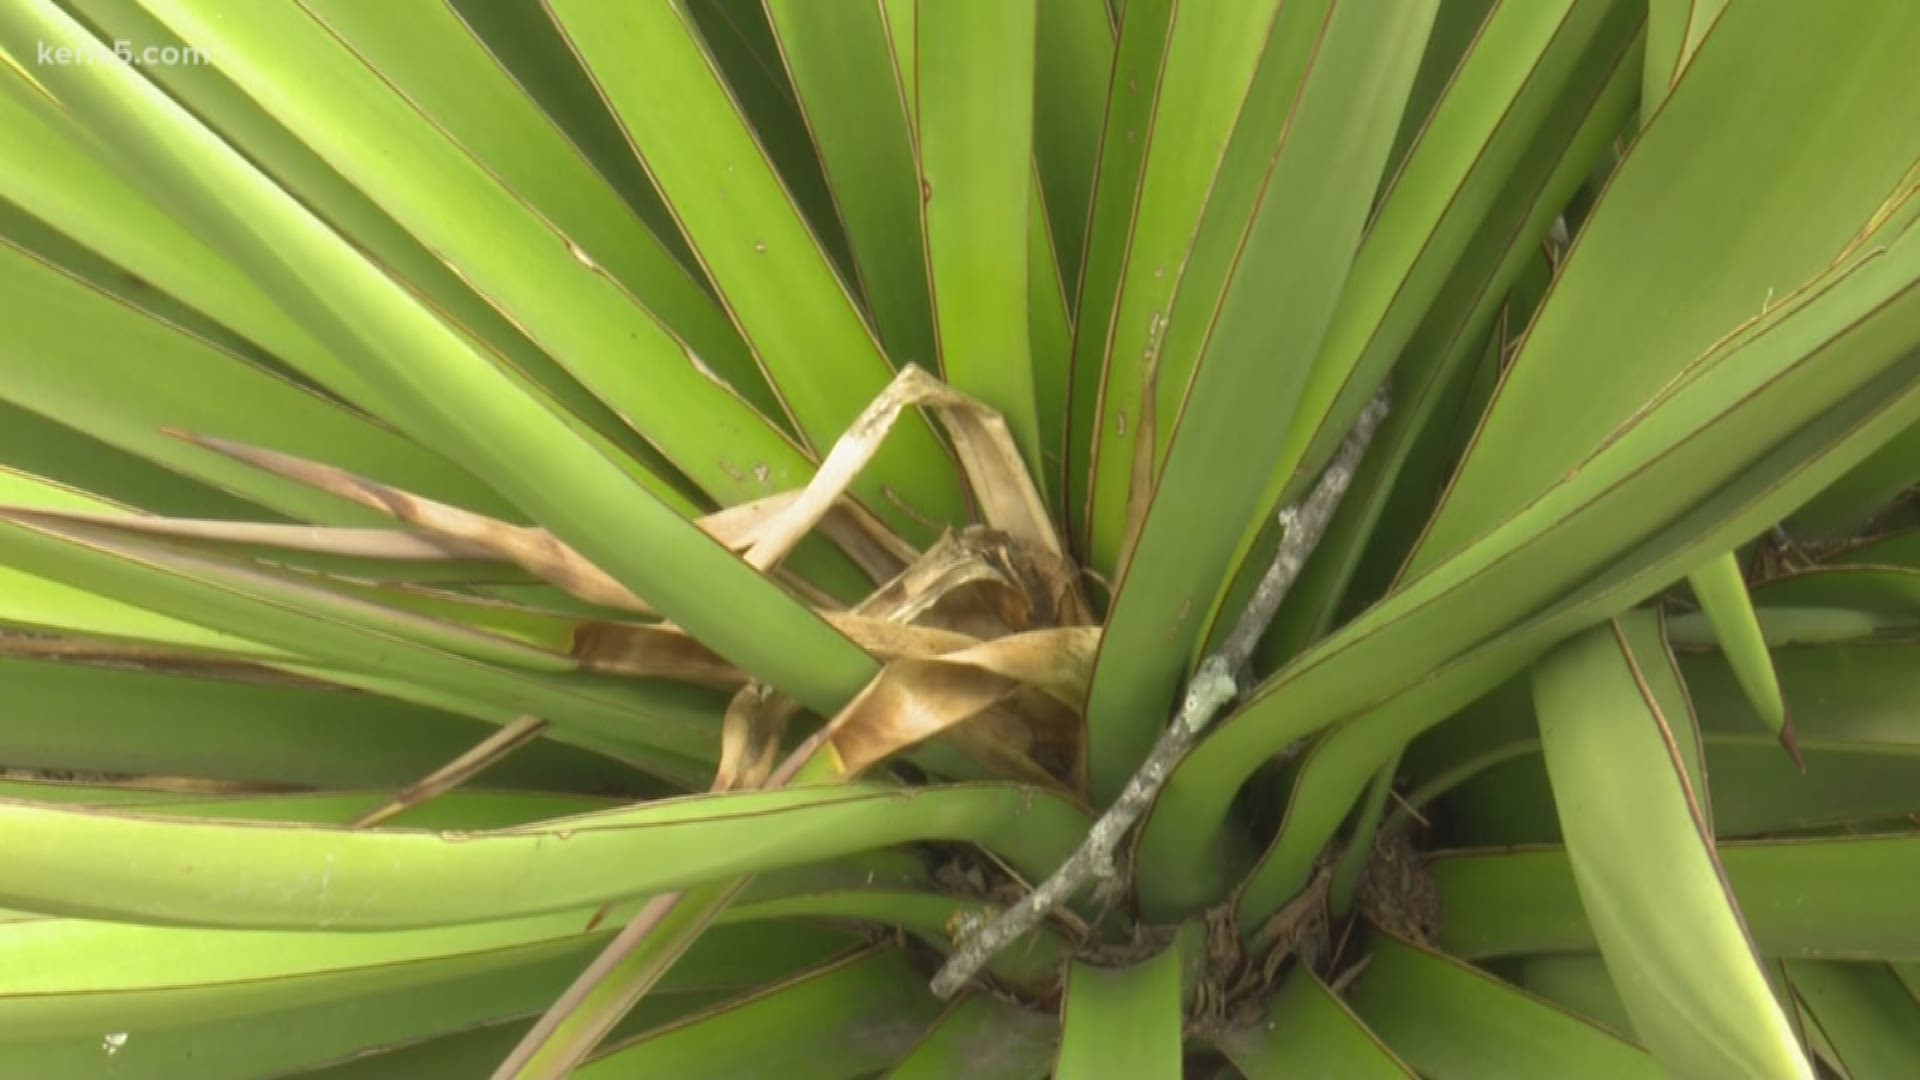 One man calls it a crime against nature and stealing from everyone who enjoys the beauty of a local park. Vandals have hacked and hauled away almost every single bloom from the yucca plants in Southside Lions Park in southeast San Antonio.